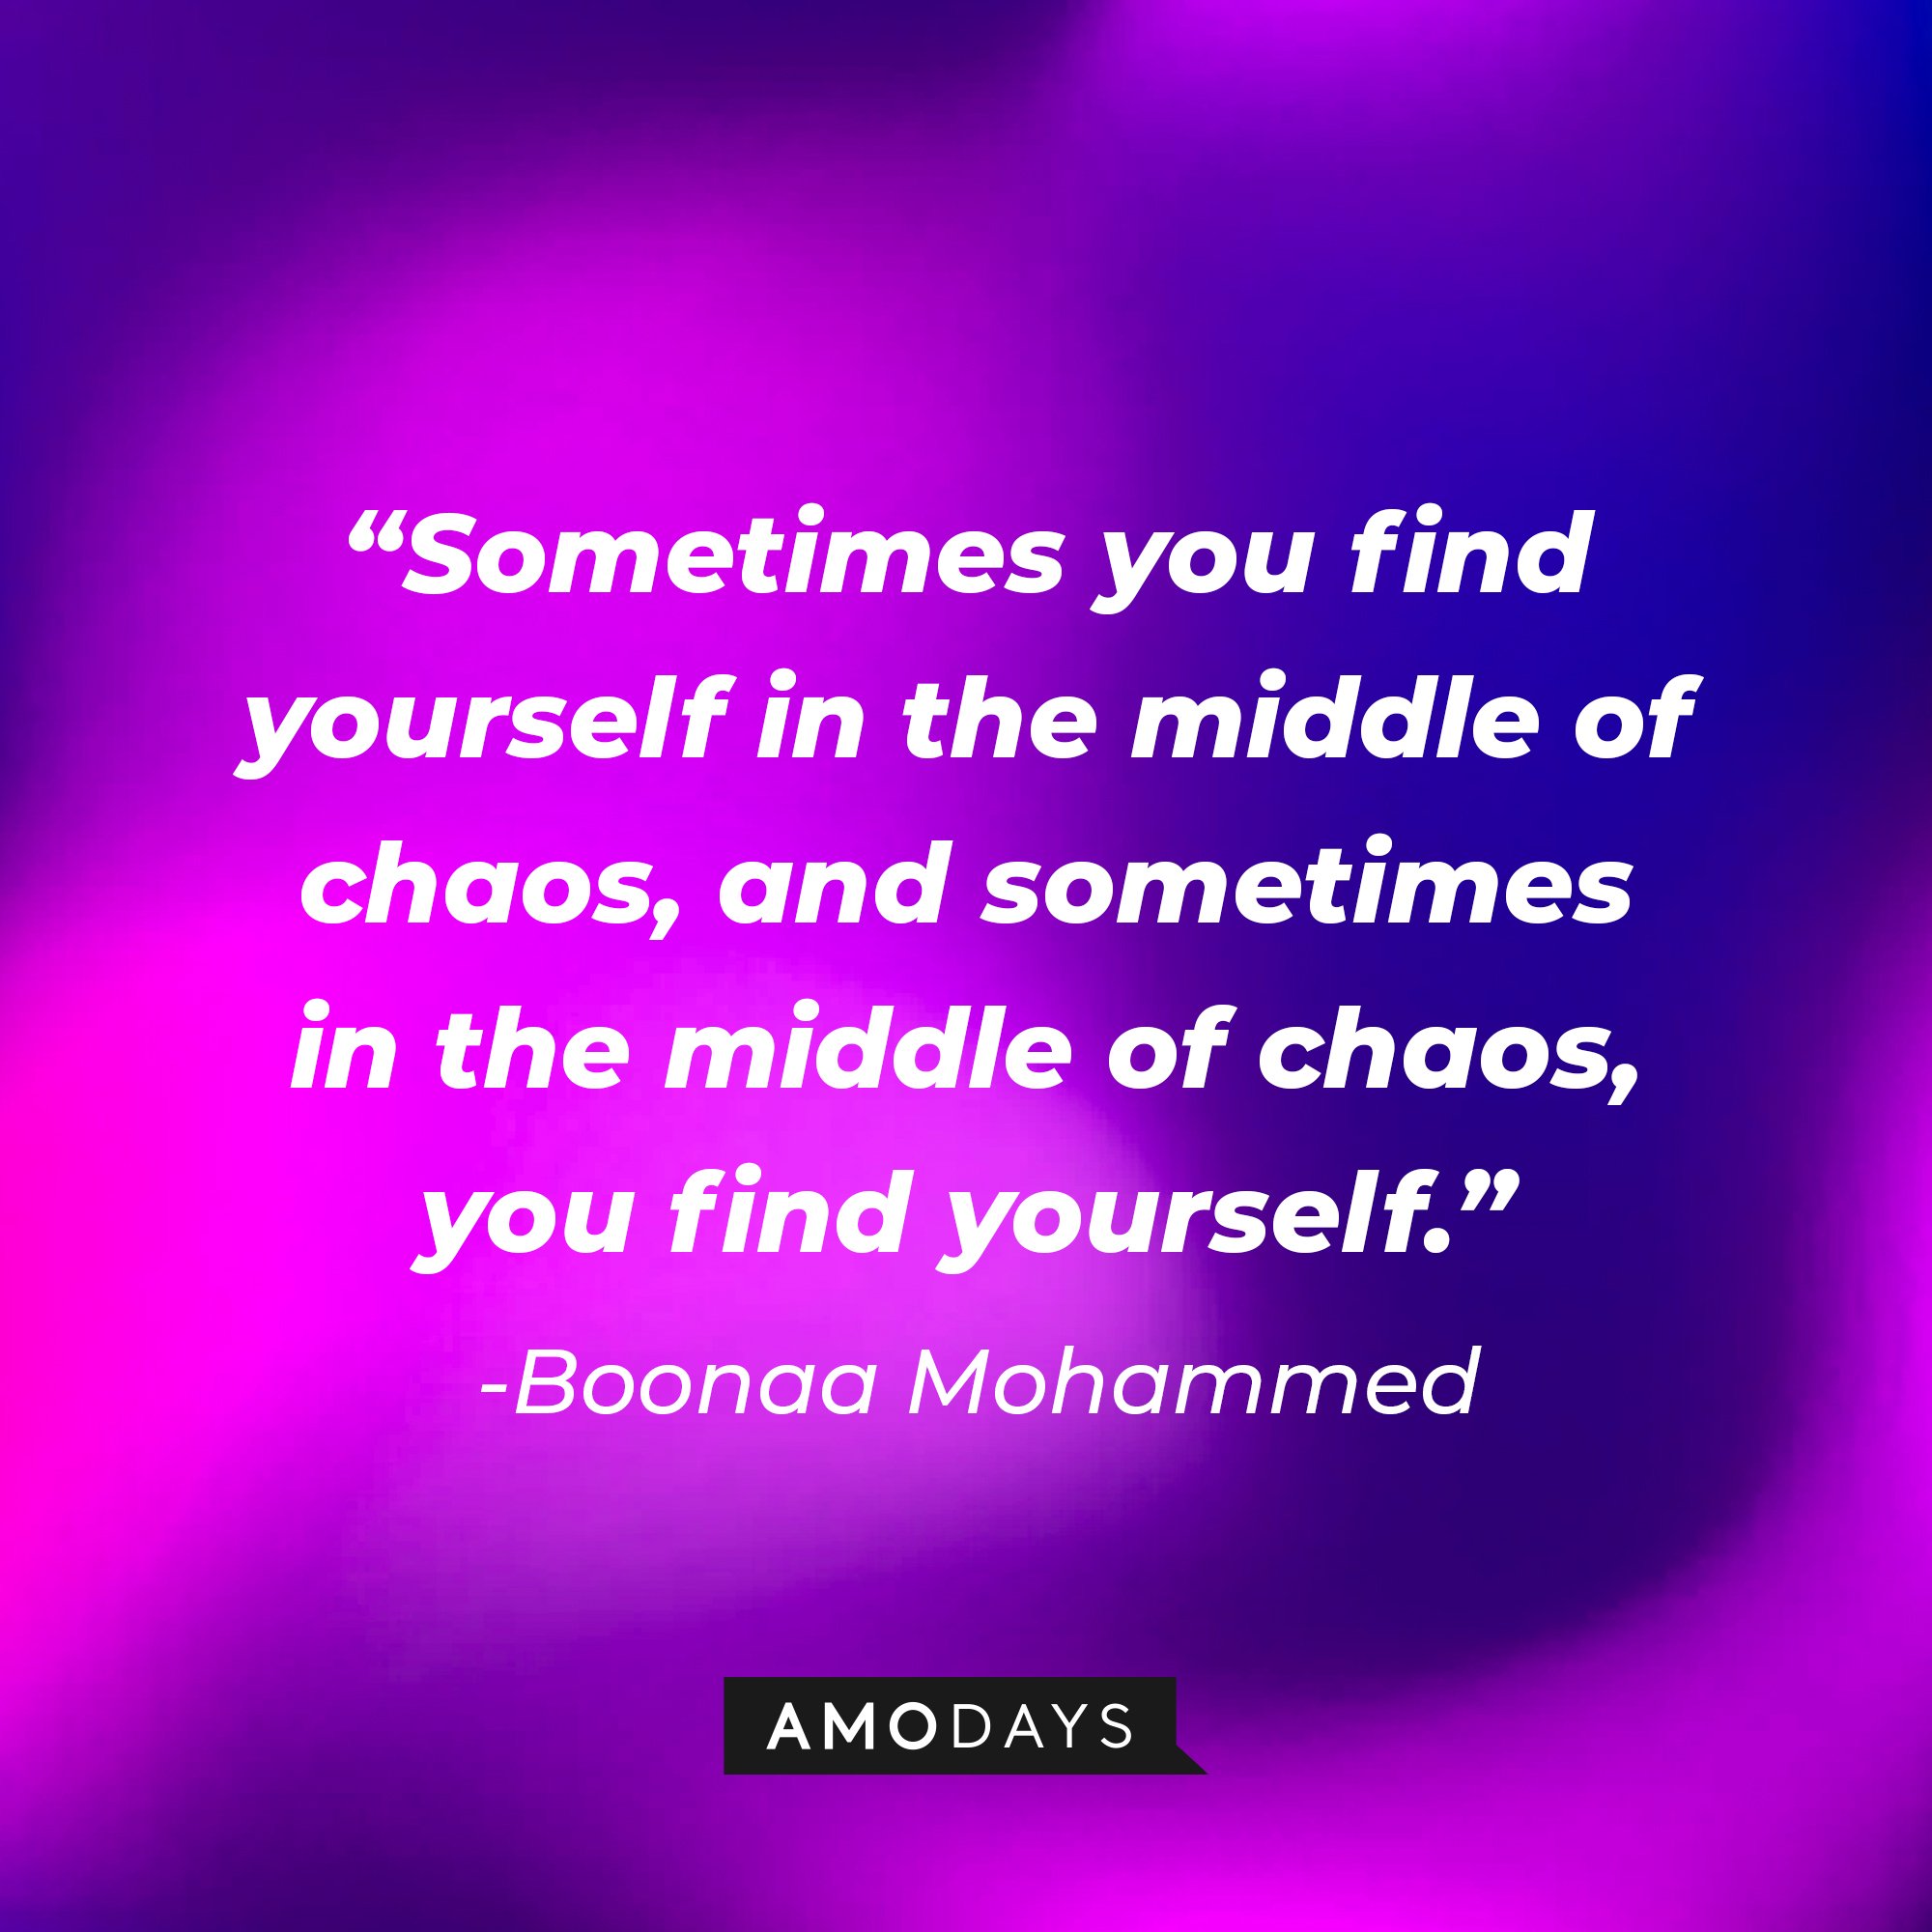 Boonaa Mohammed's quote: "Sometimes you find yourself in the middle of chaos, and sometimes in the middle of chaos, you find yourself." | Image: AmoDays 